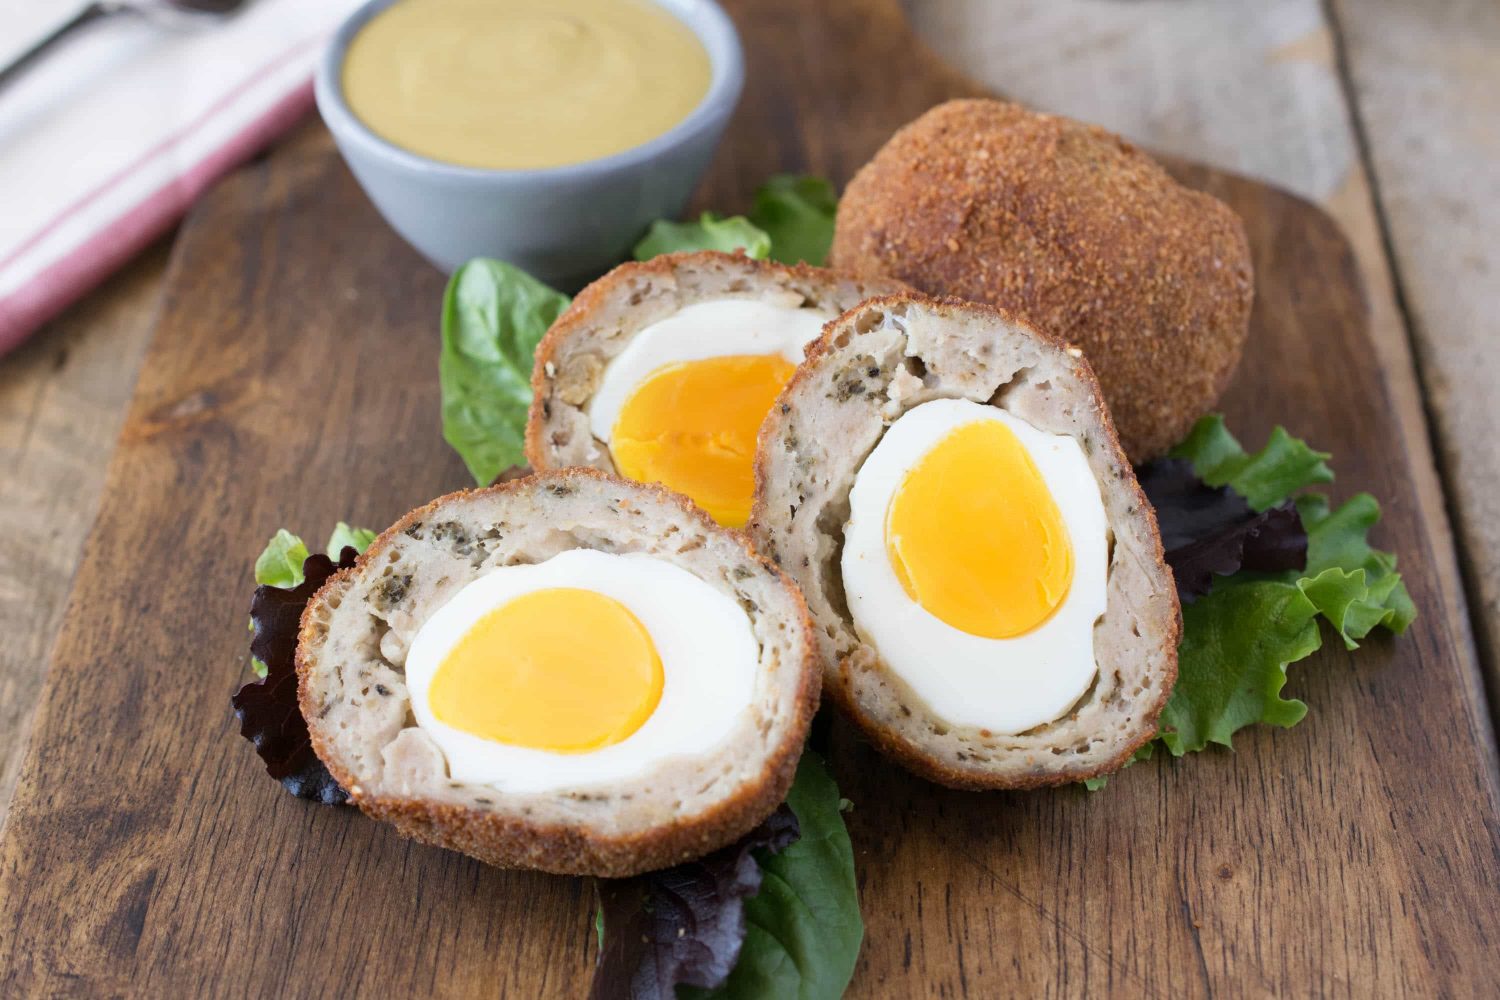 Can You Pass This Very British Food Quiz? Scotch Eggs